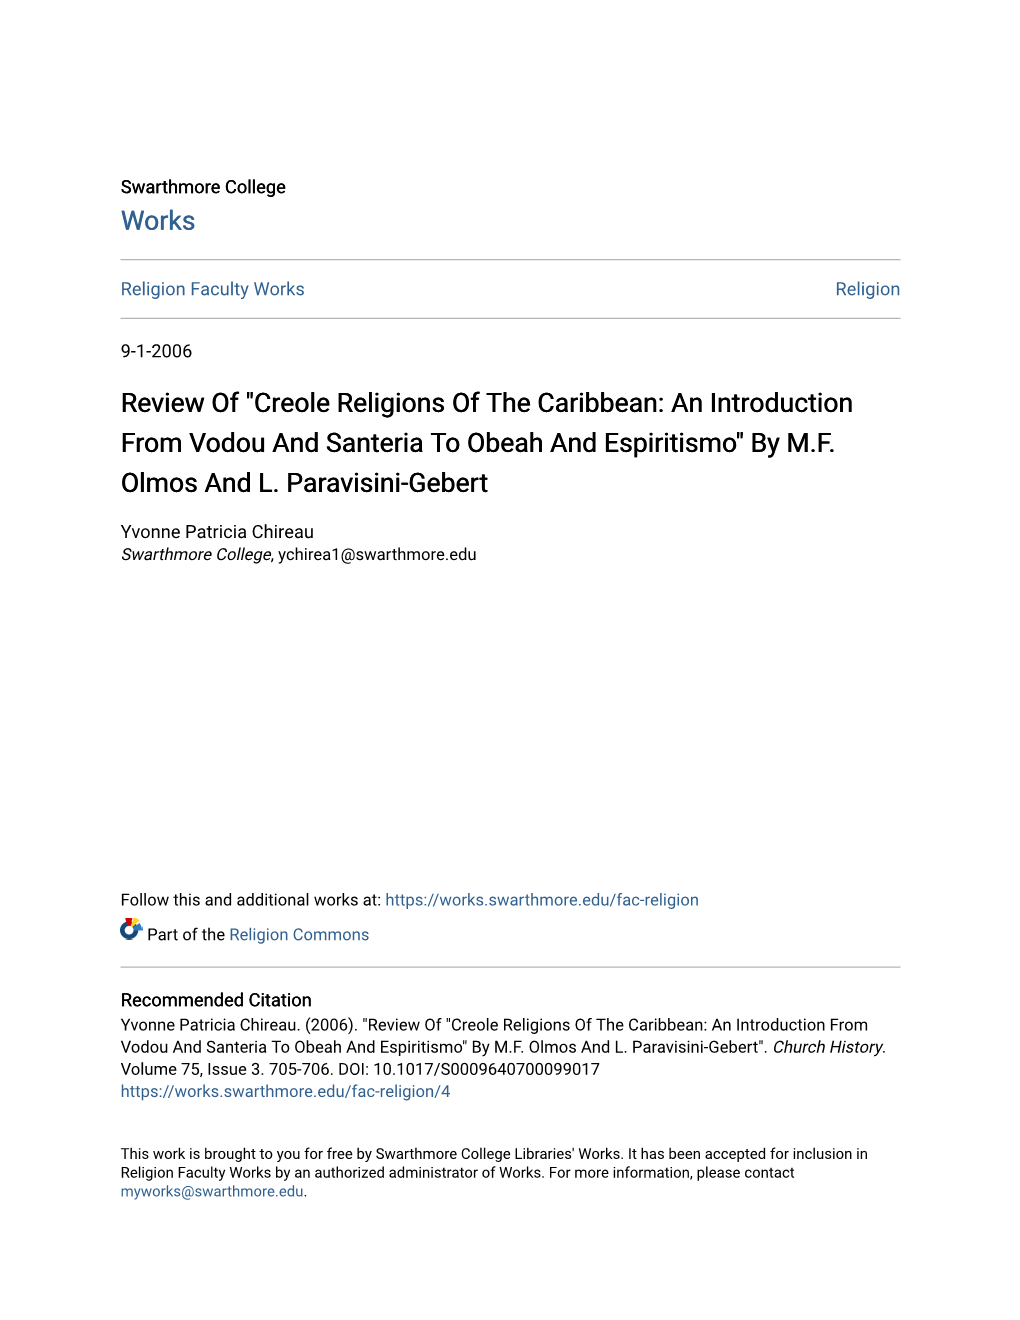 Review of "Creole Religions of the Caribbean: an Introduction from Vodou and Santeria to Obeah and Espiritismo" by M.F